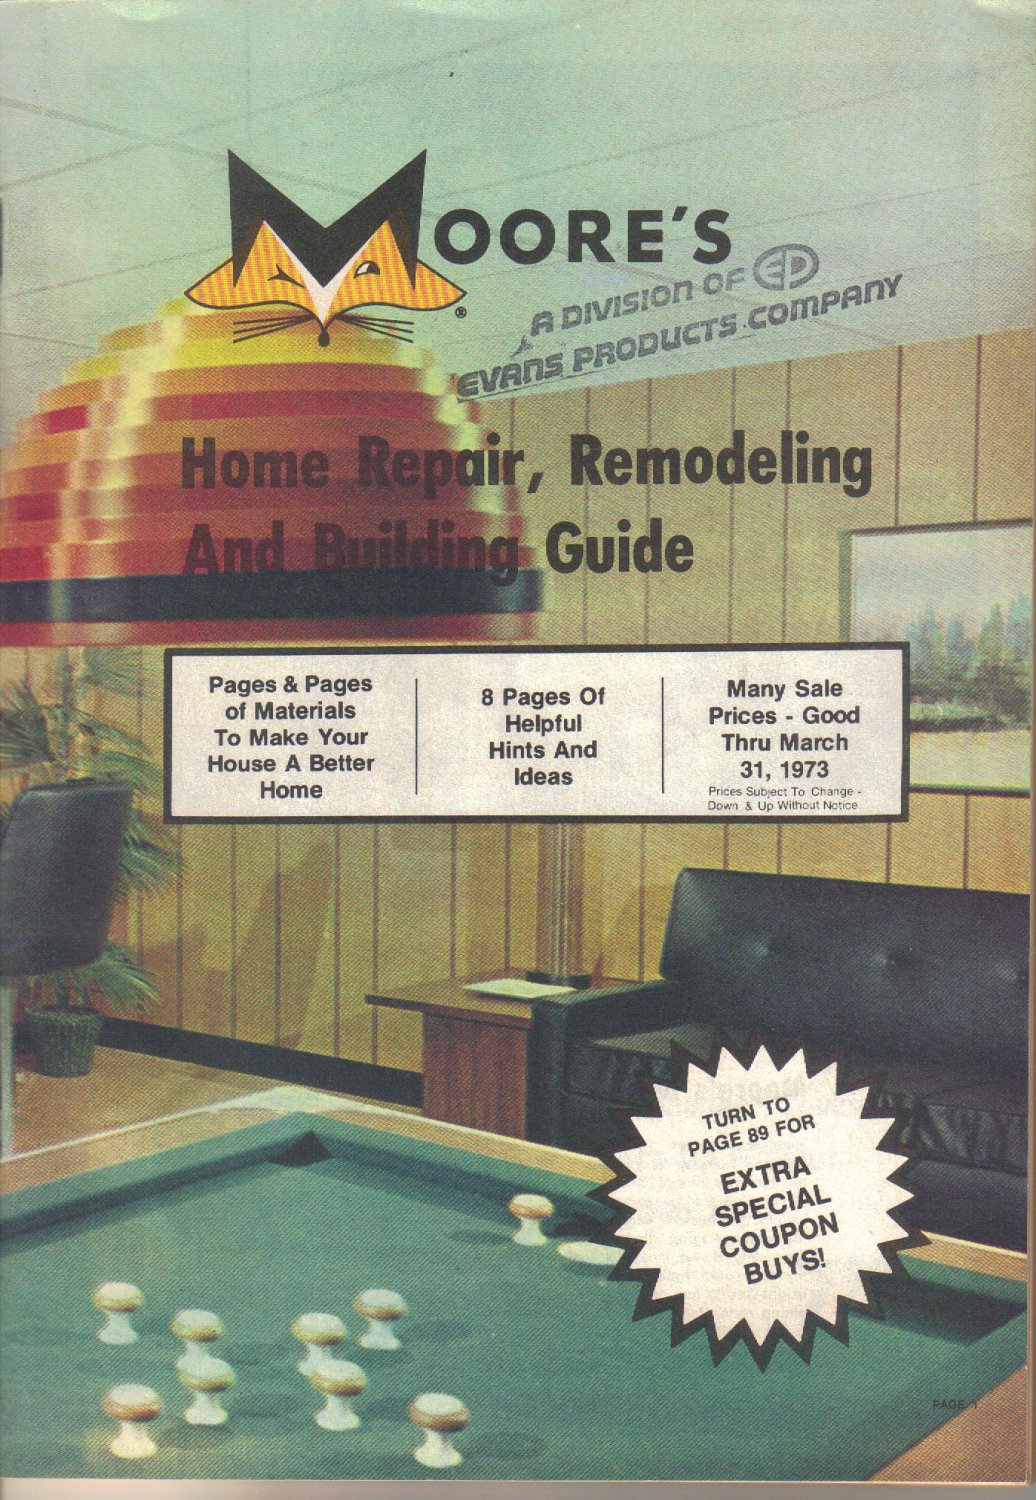 Moore's Catalog-Home Repair, Remodeling, Building Guide, Hardware, Fox logo-March 1973